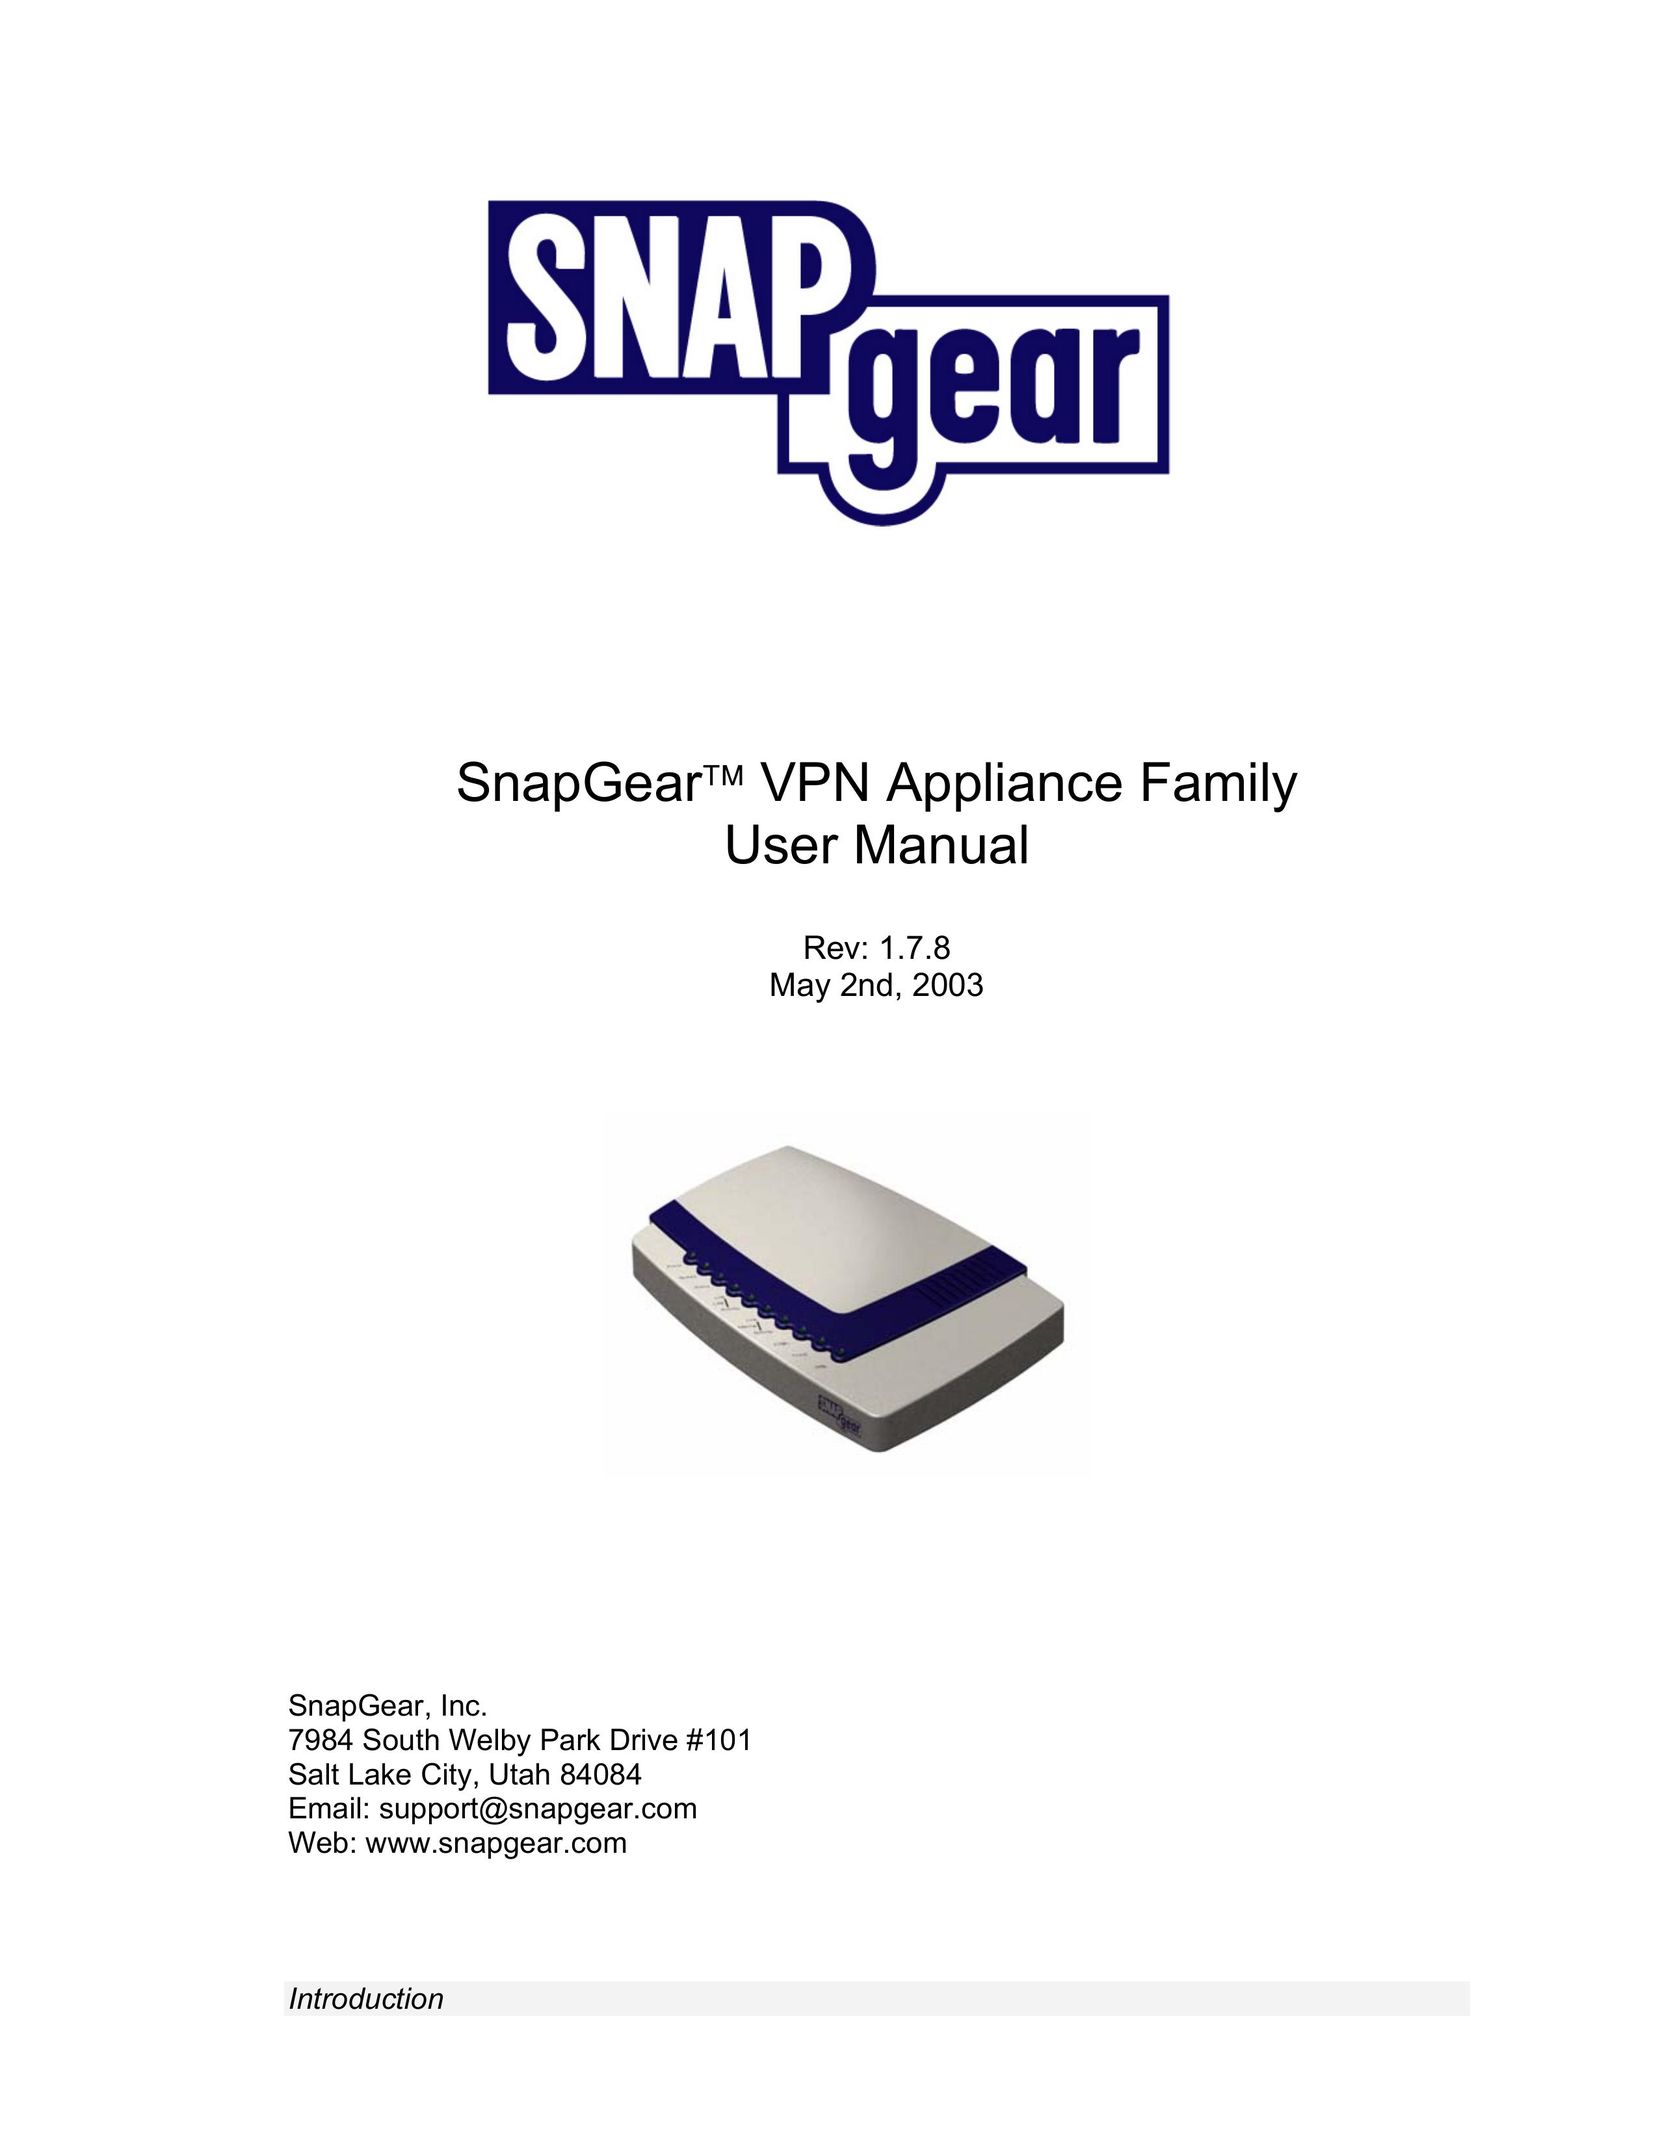 SnapGear 1.7.8 Network Router User Manual